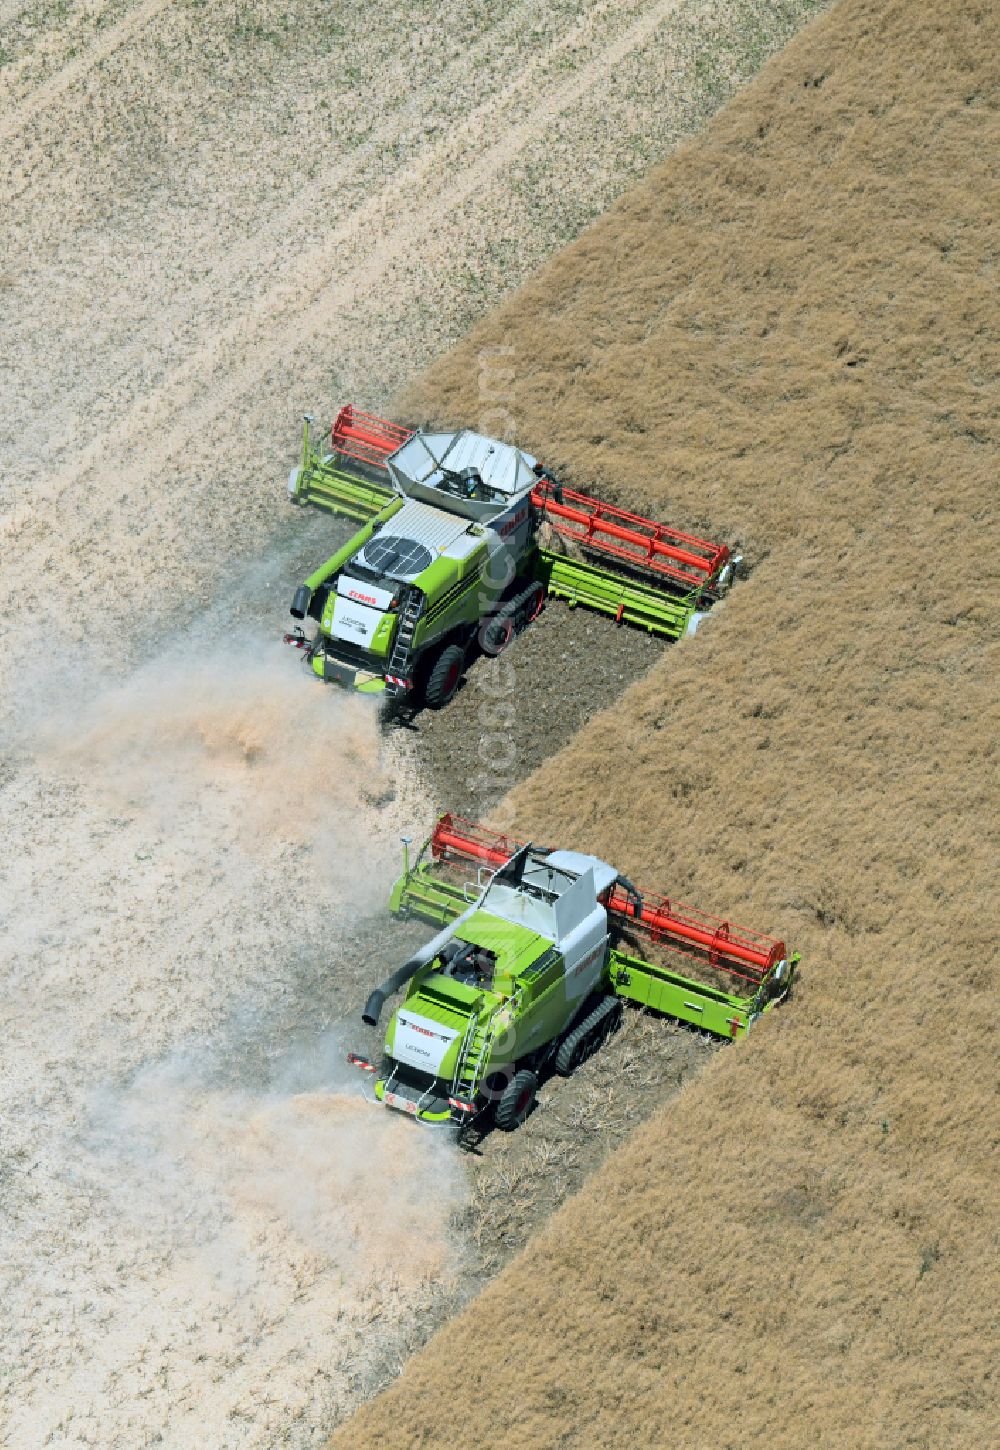 Niedergrunstedt from the bird's eye view: Harvest use of heavy agricultural machinery - combine harvesters and harvesting vehicles on agricultural fields in Niedergrunstedt in the state Thuringia, Germany